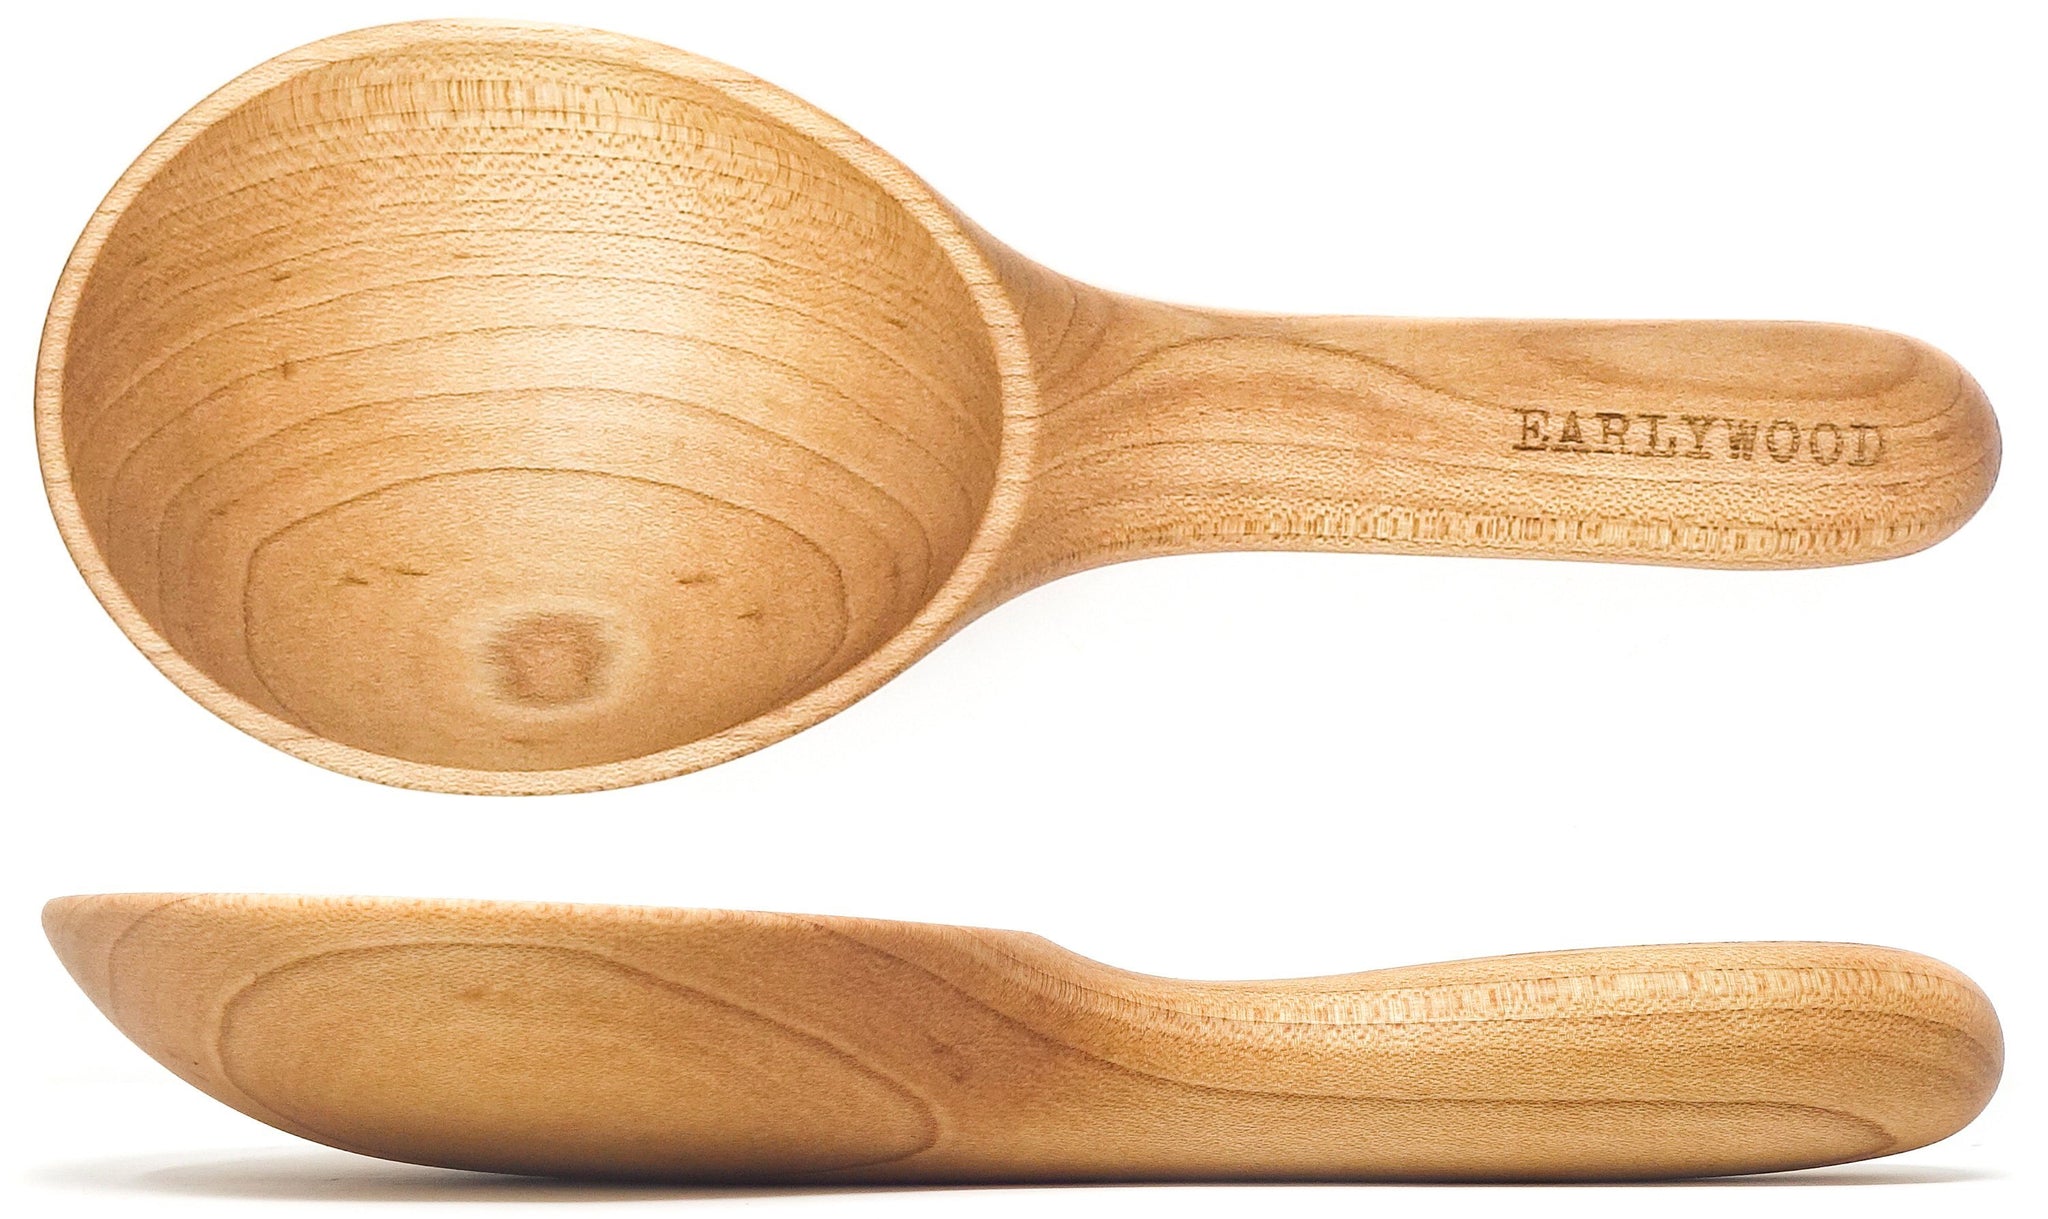 Wooden Cooking Spoon - Earlywood